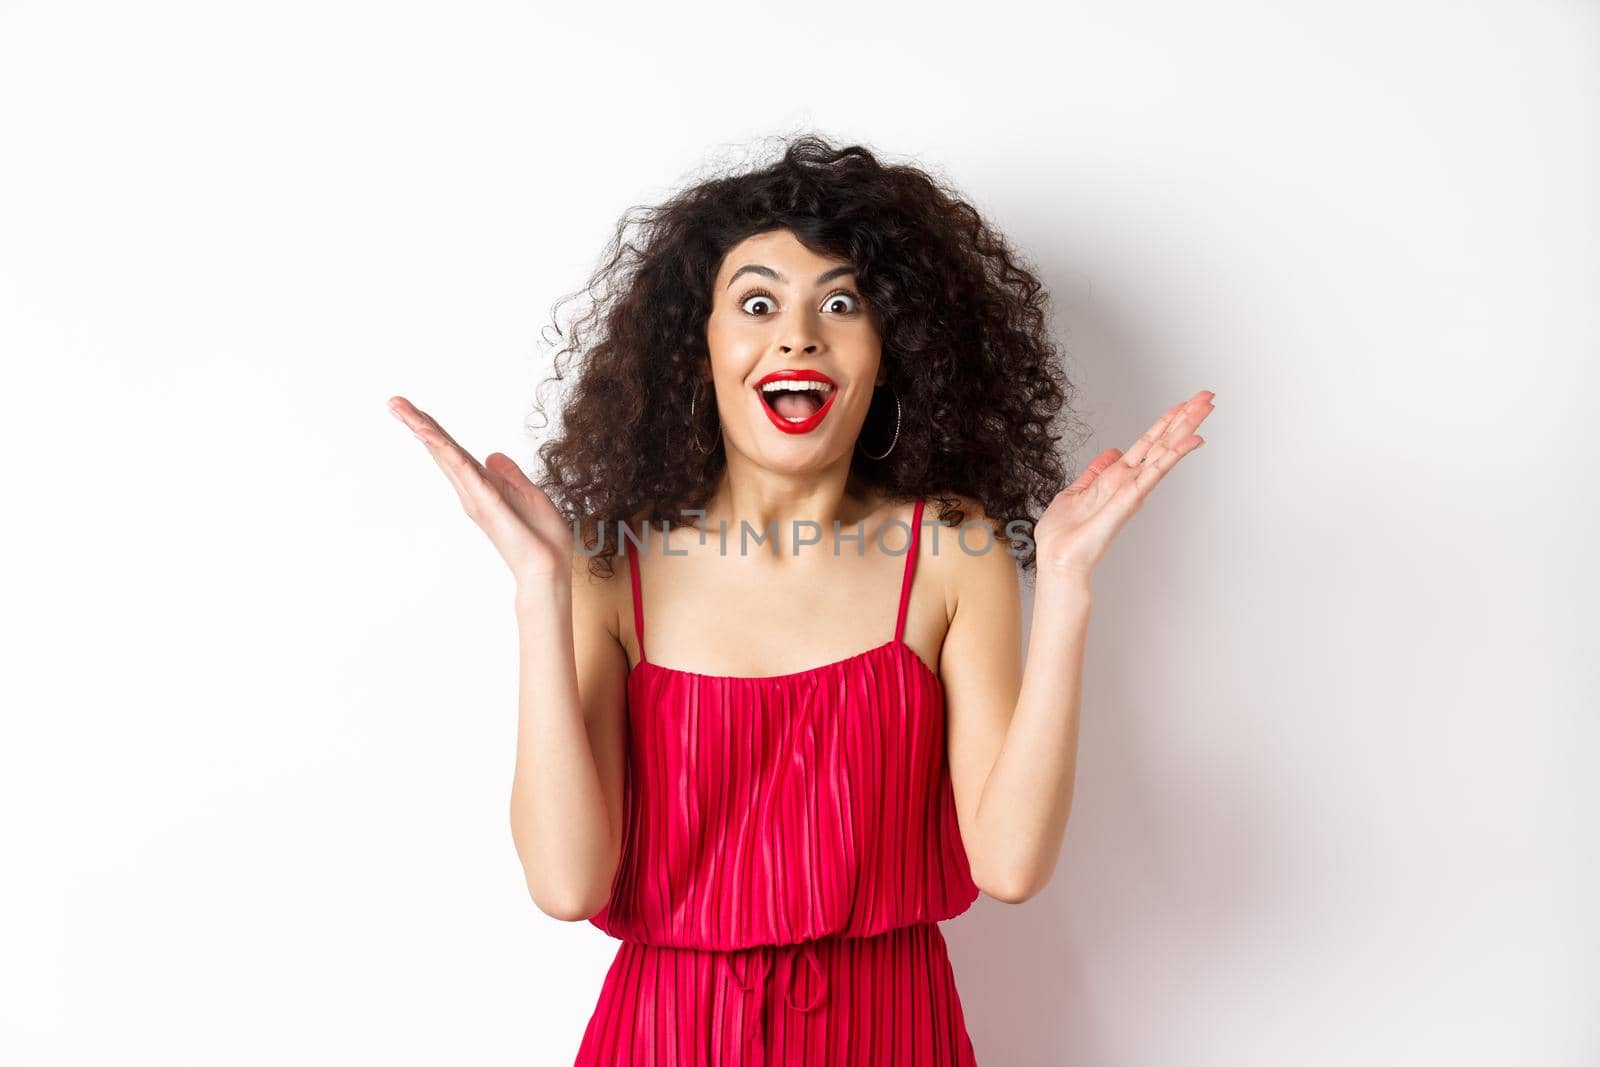 Surprised happy woman reacting to big news, looking cheerful with hands spread sidewas, standing in red dress on white background.